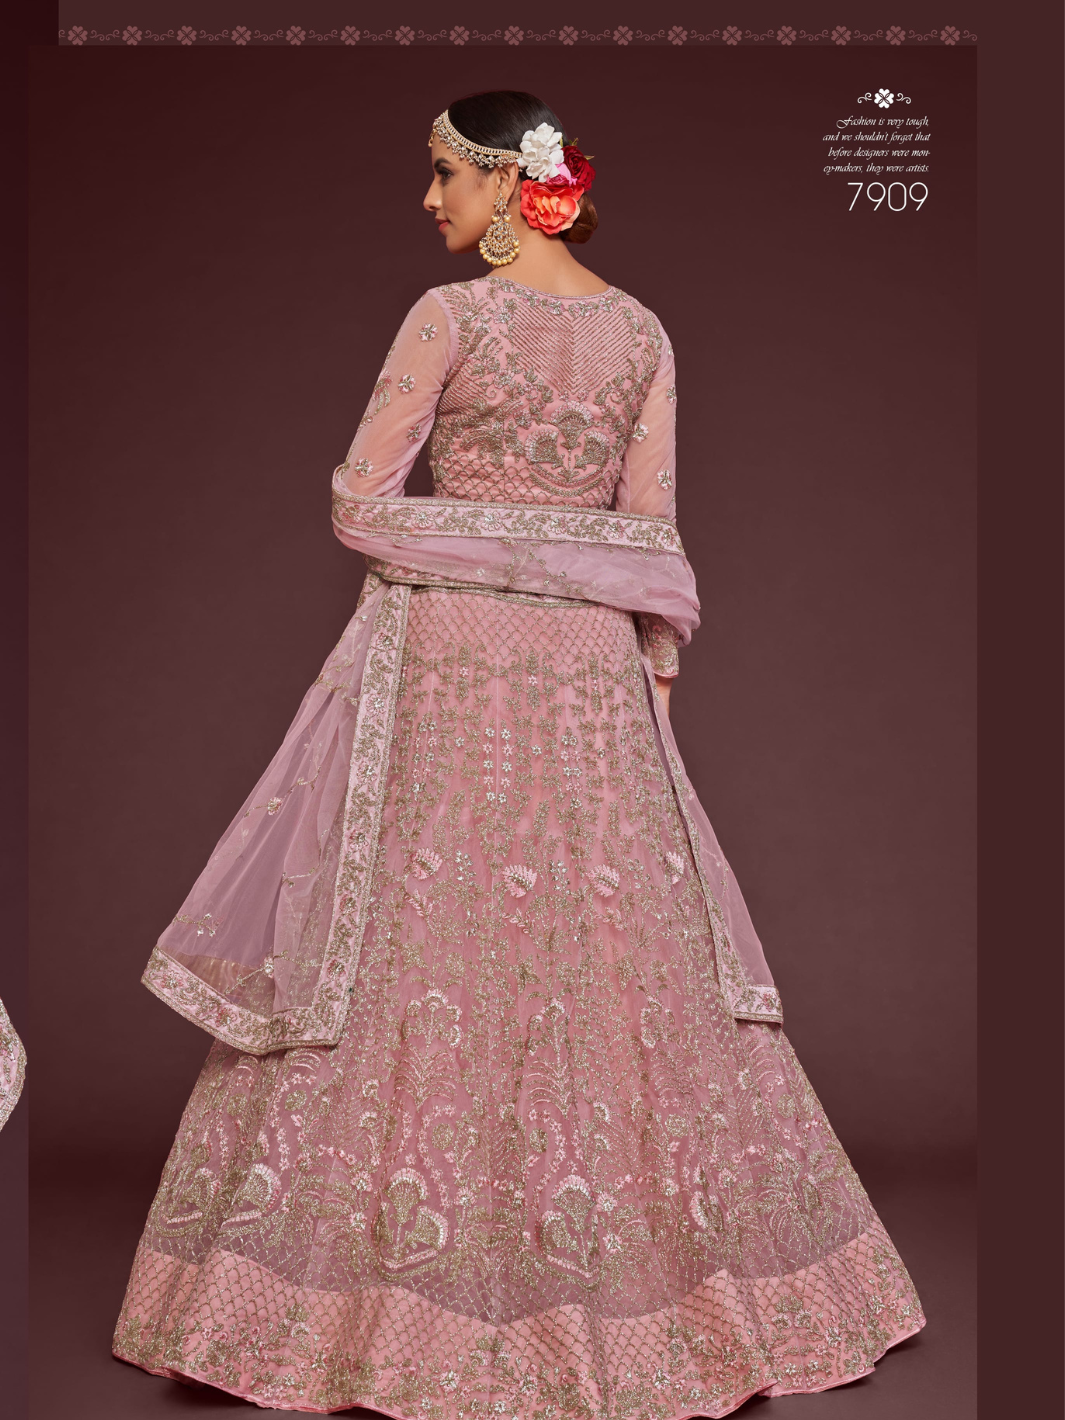 Shimmer full work PINK lehenga with long sleeve blouse and dupatta 7909